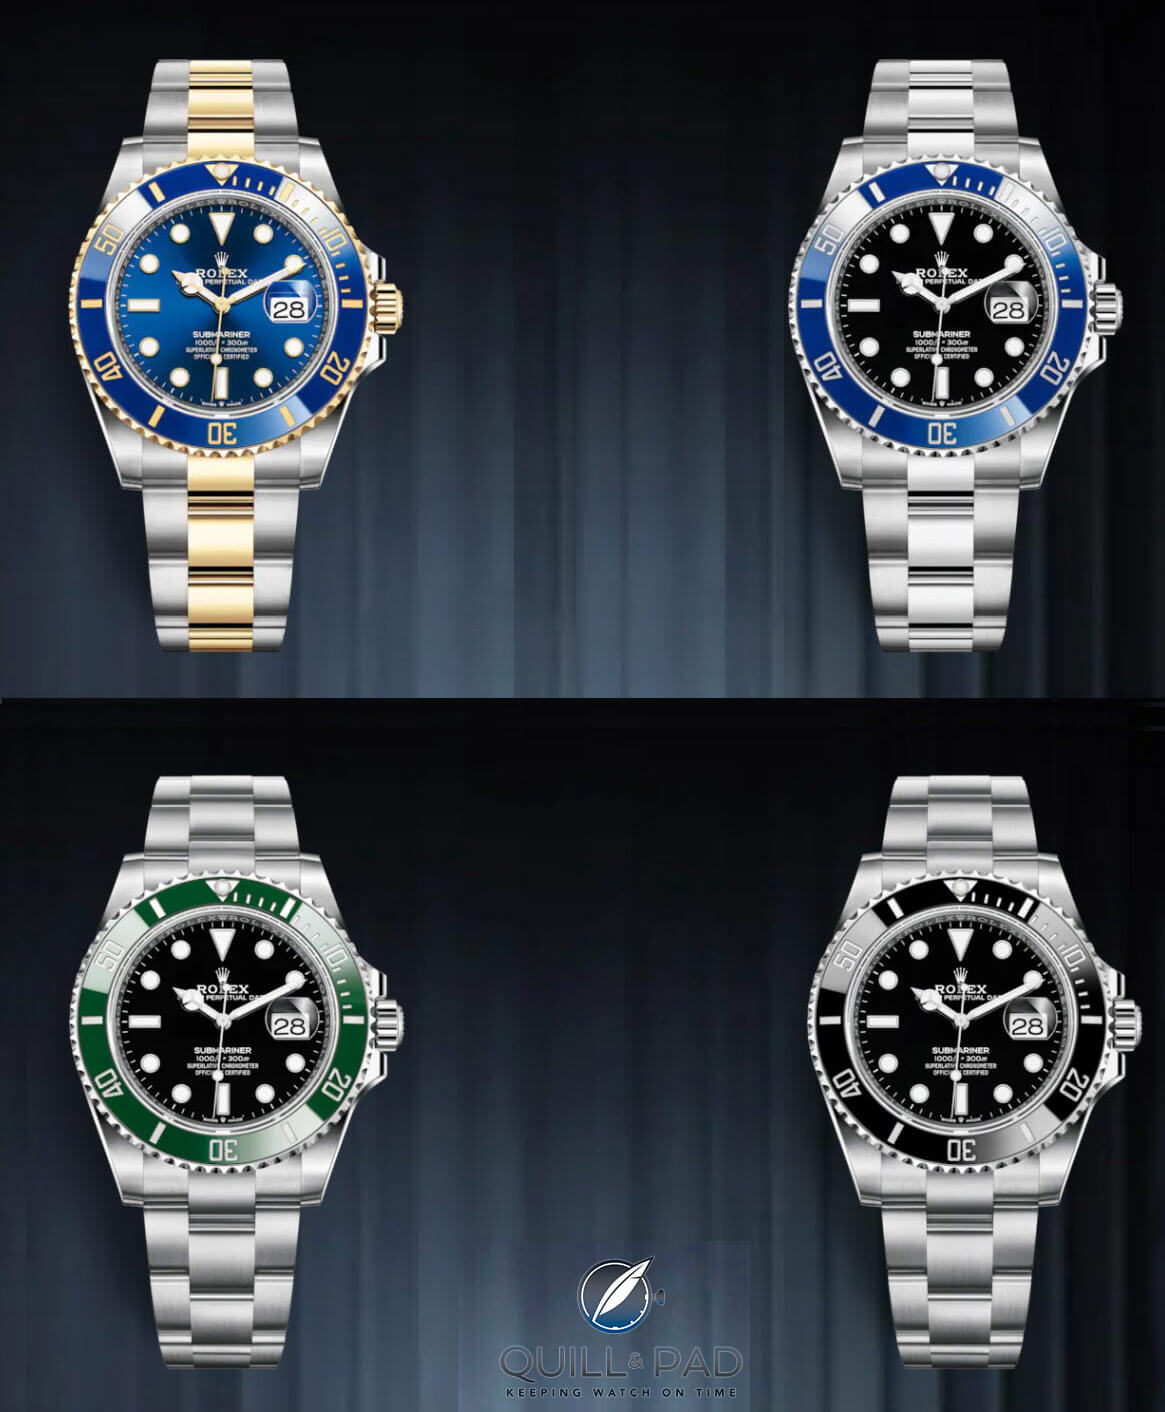 Rouse håndtag Strømcelle All 4 New Rolex 2020 Collection Updates Plus One Watch You Might Have  Missed - Quill & Pad